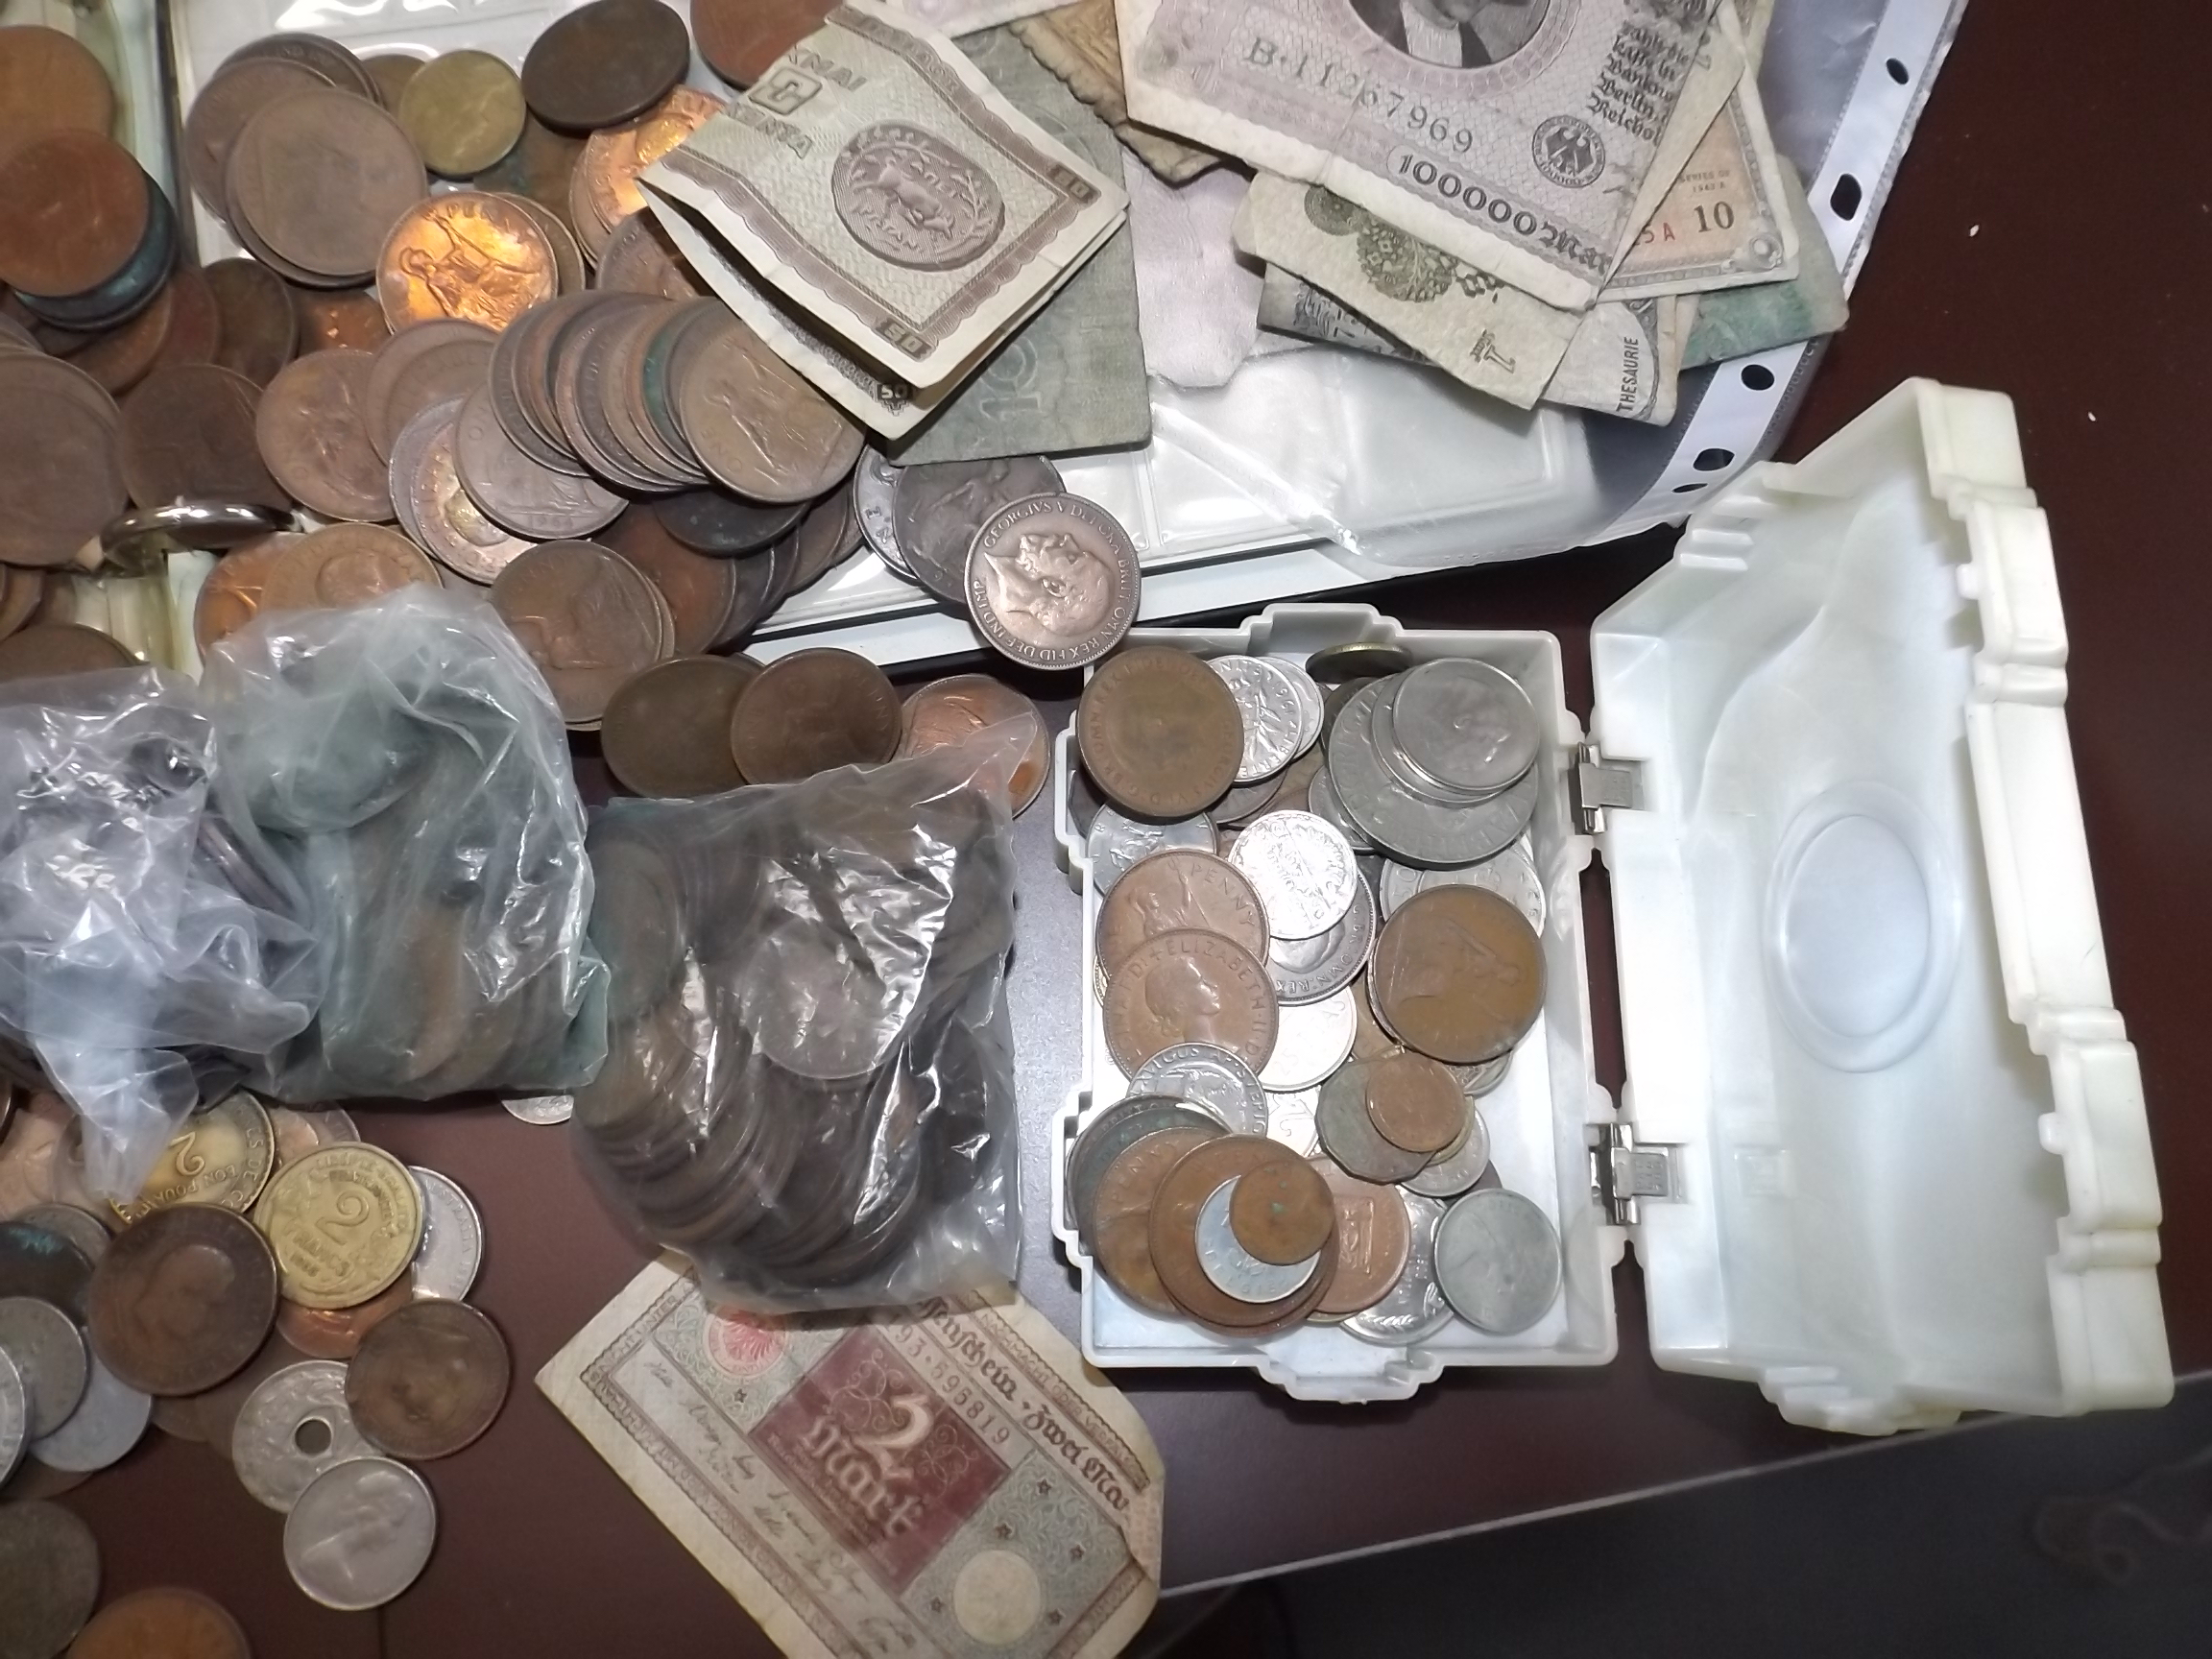 World coins and banknotes including British copper. - Image 3 of 3